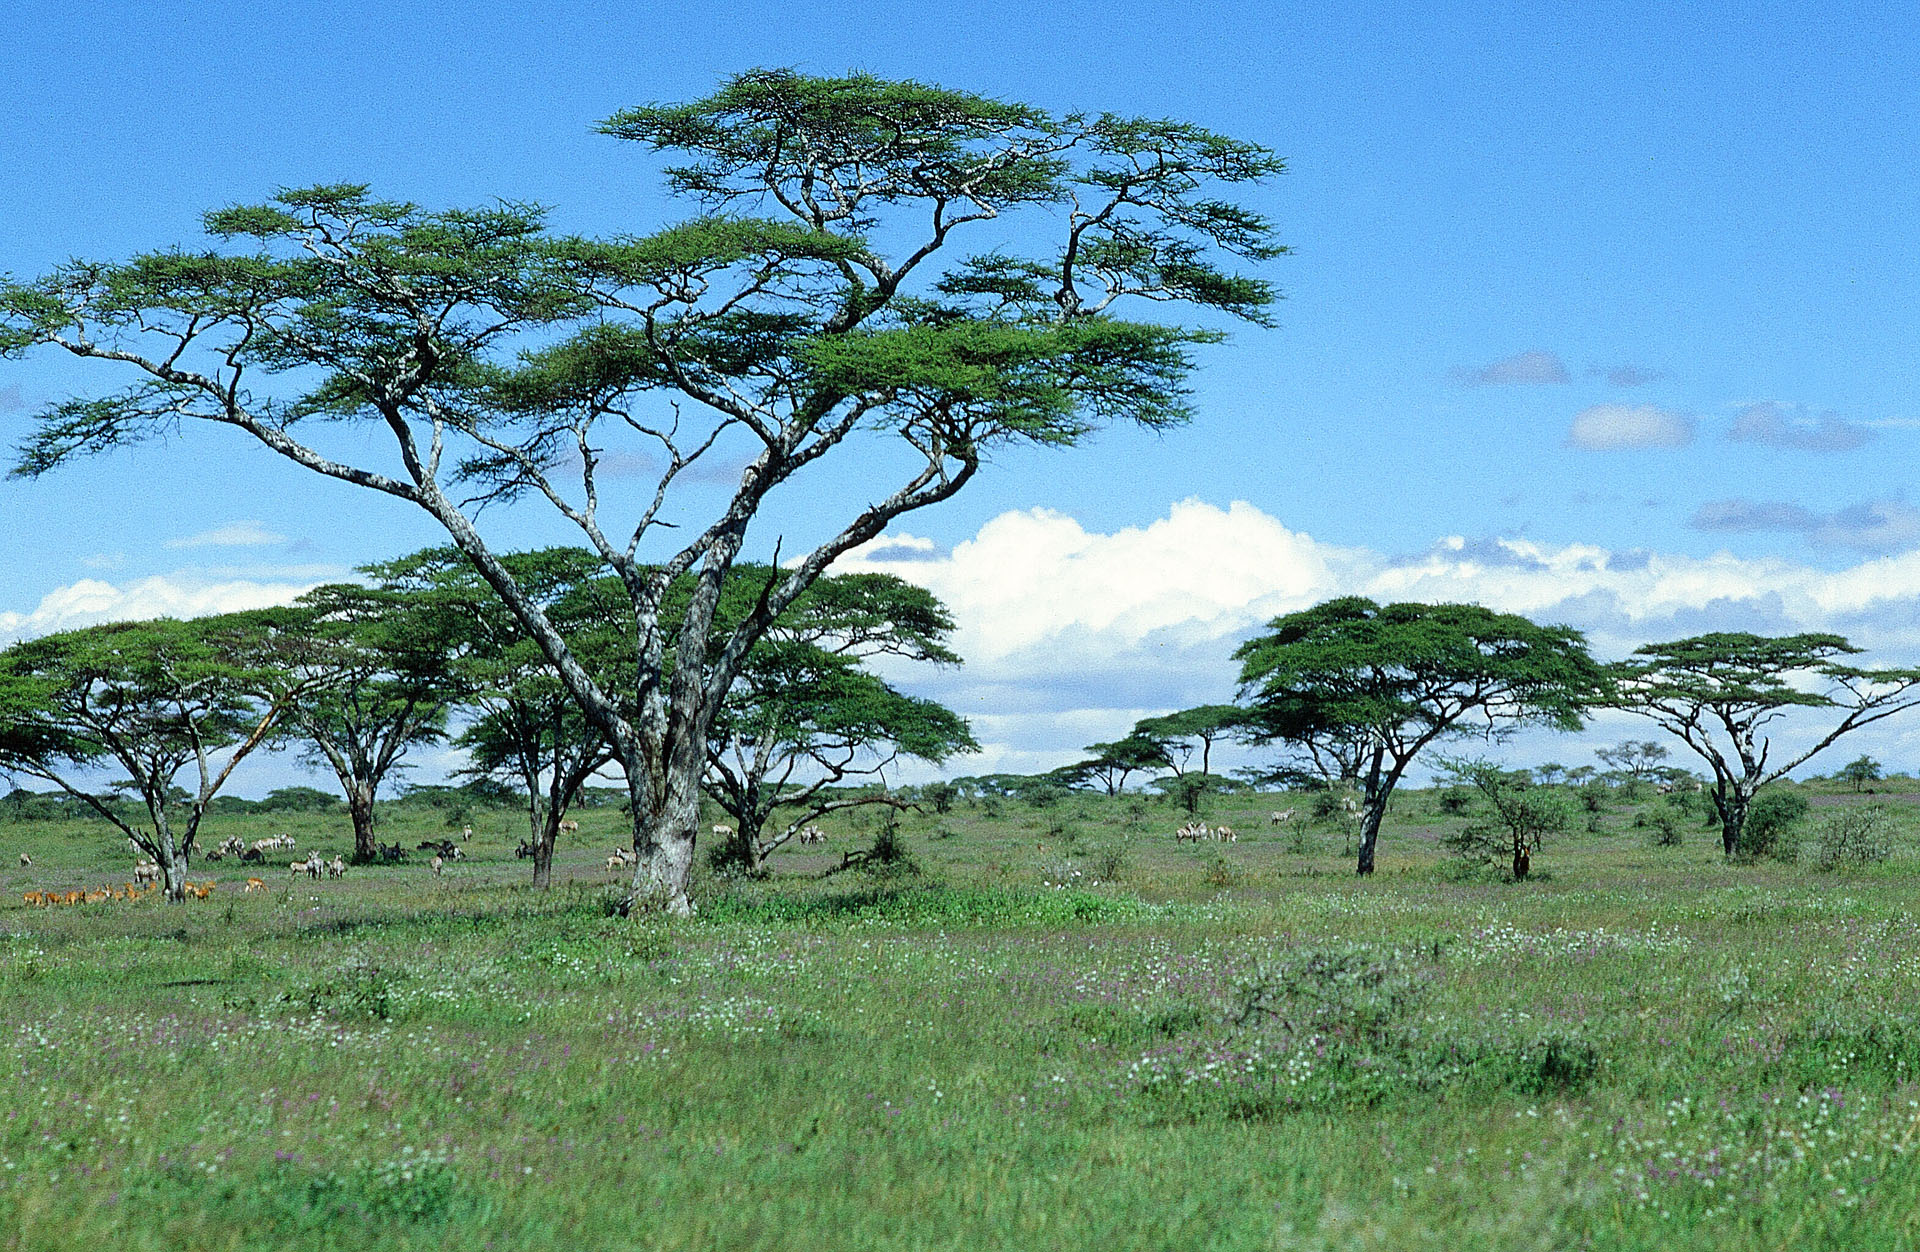 Umbrella thorn acacias (Vachellia tortilis, formerly Acacia tortilis) in the East African Serengeti are the epitome of a savanna landscape.